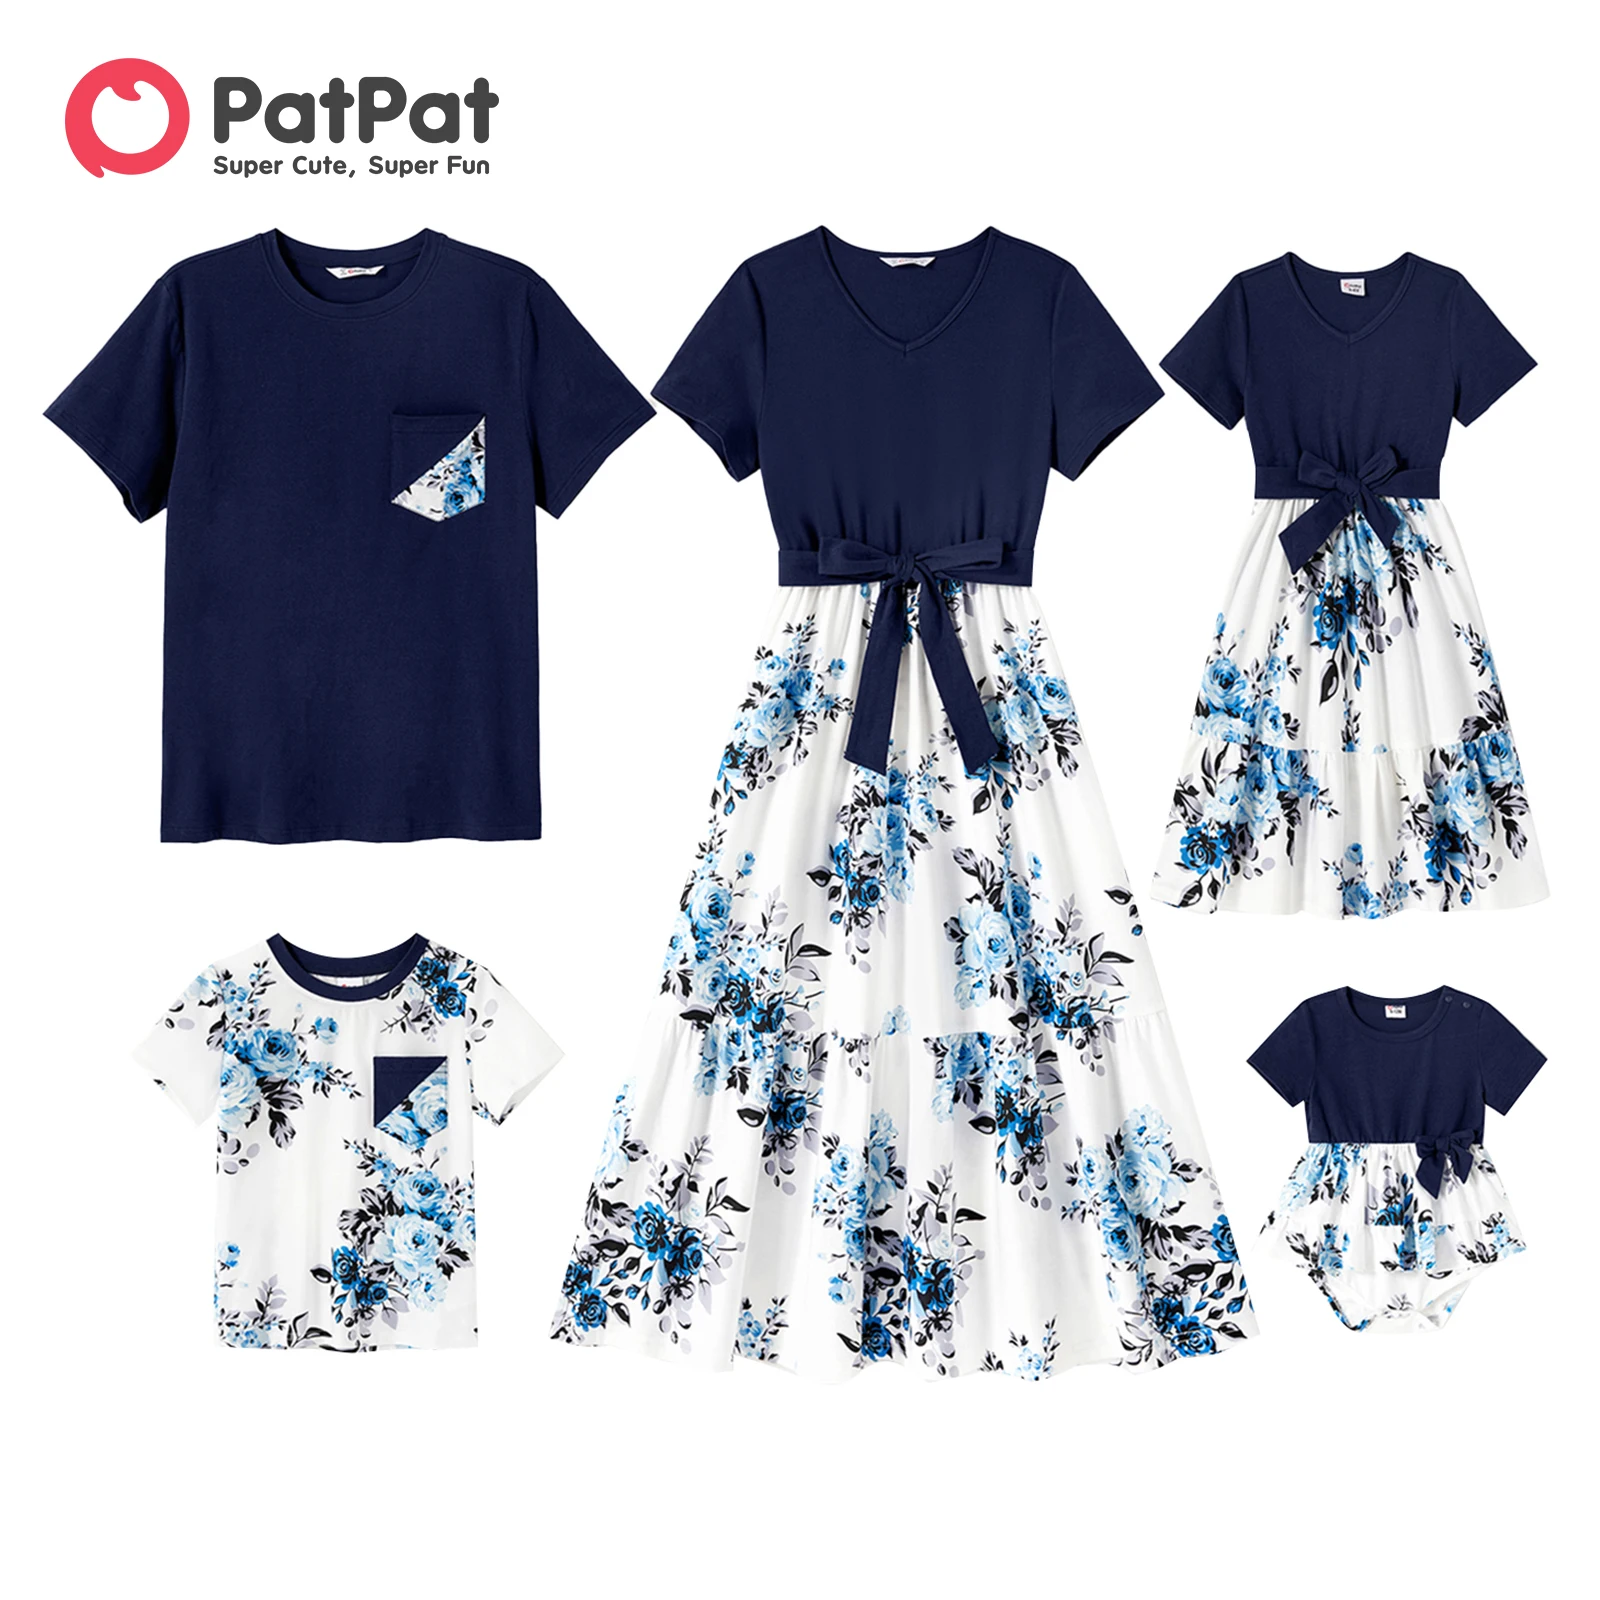 PatPat Family Matching 95% Cotton Dark Blue Short-sleeve T-shirts and Floral Print Spliced Dresses Sets